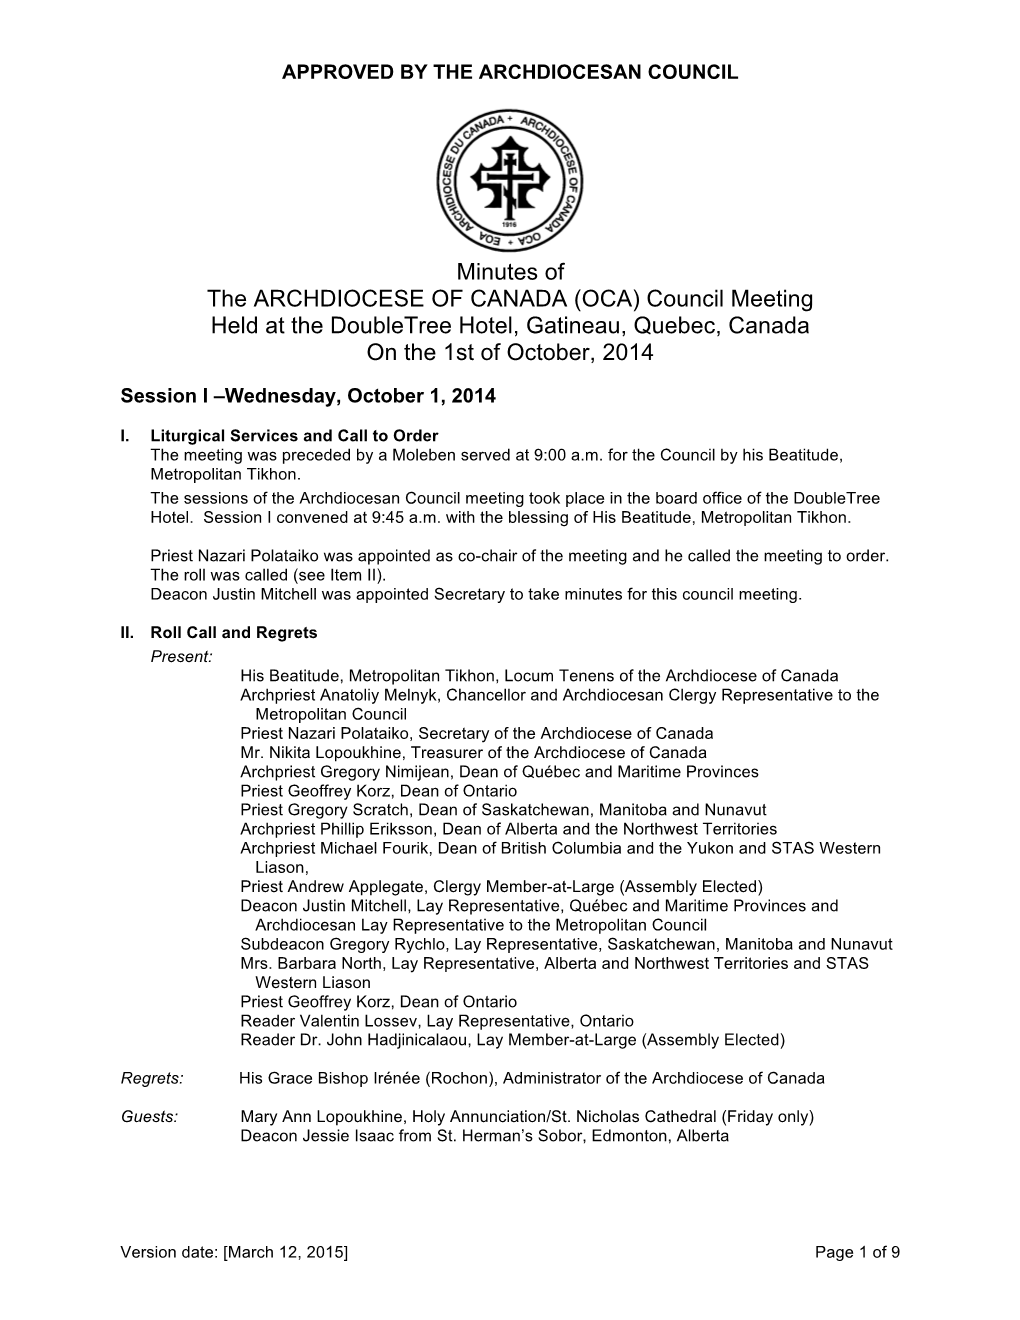 Minutes of the ARCHDIOCESE of CANADA (OCA) Council Meeting Held at the Doubletree Hotel, Gatineau, Quebec, Canada on the 1St of October, 2014